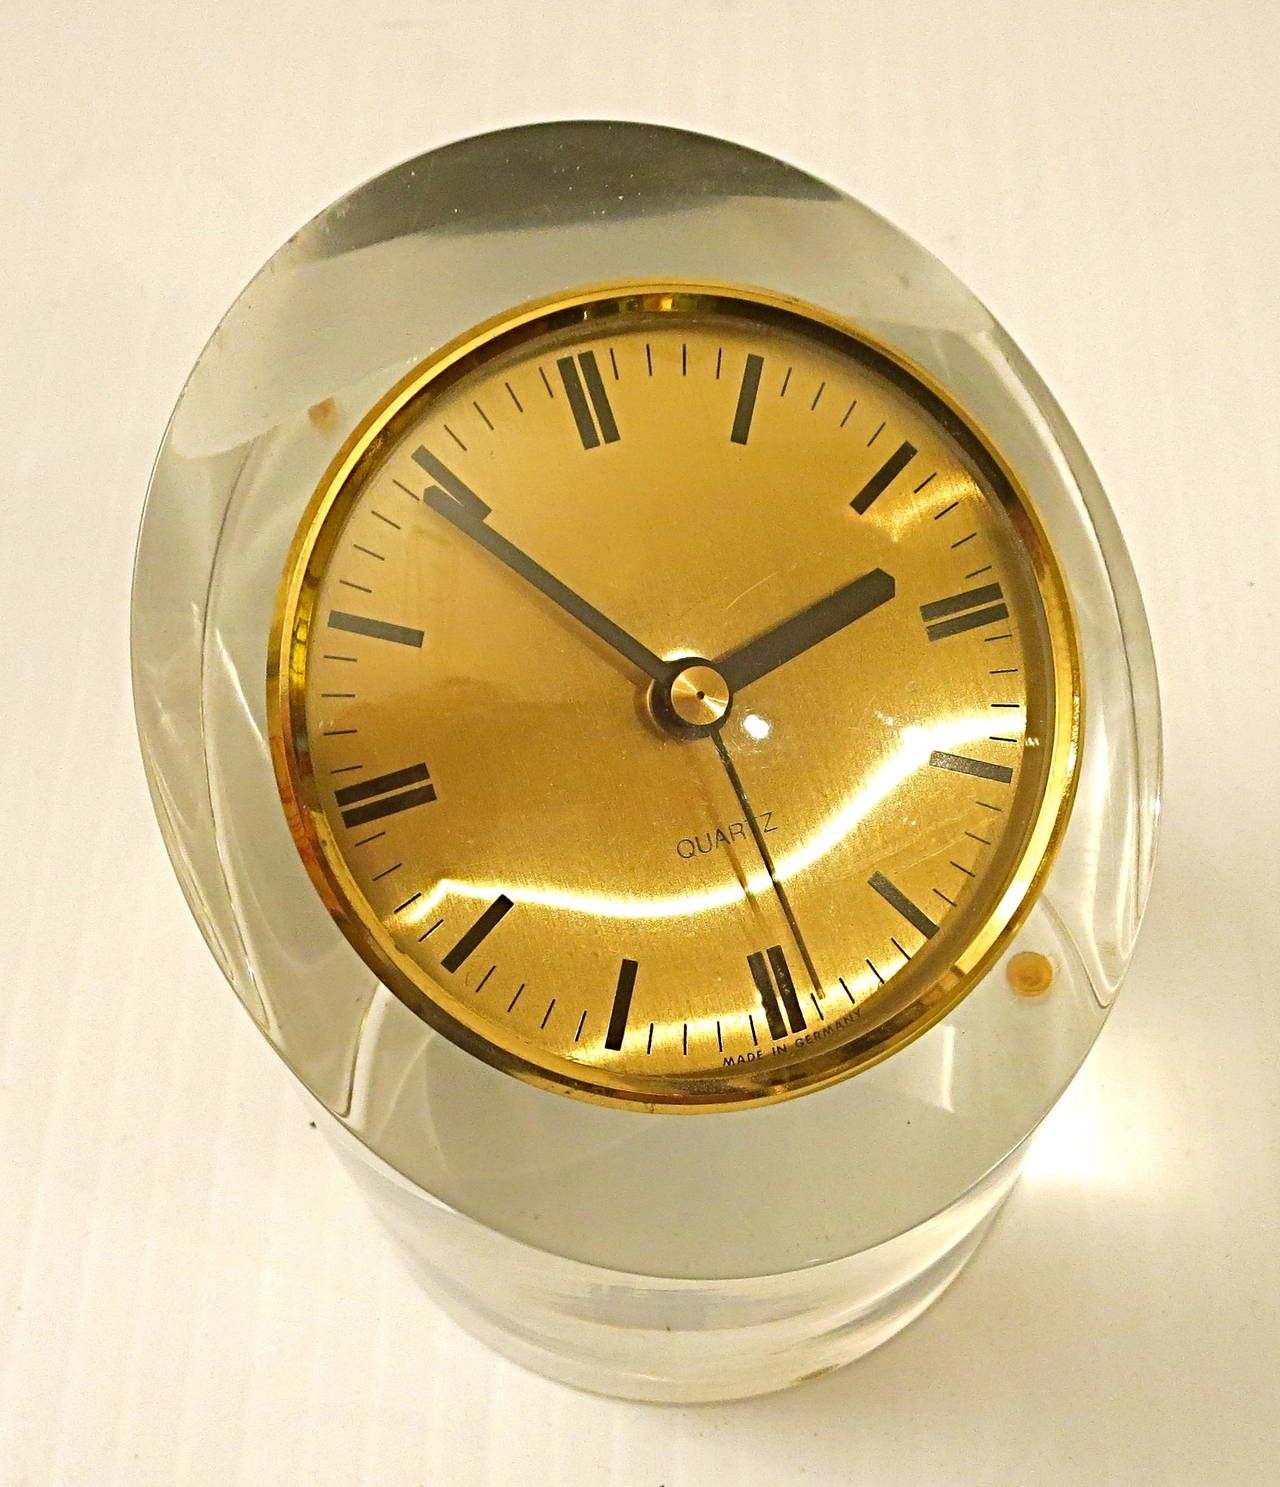 A very unique solid Lucite pipping, cut in an angle with a brass clock with German movement quartz, manufactured by Kienzle and in great condition, the Lucite has been polished and has no cracks or chips. In the style of Karl Springer.